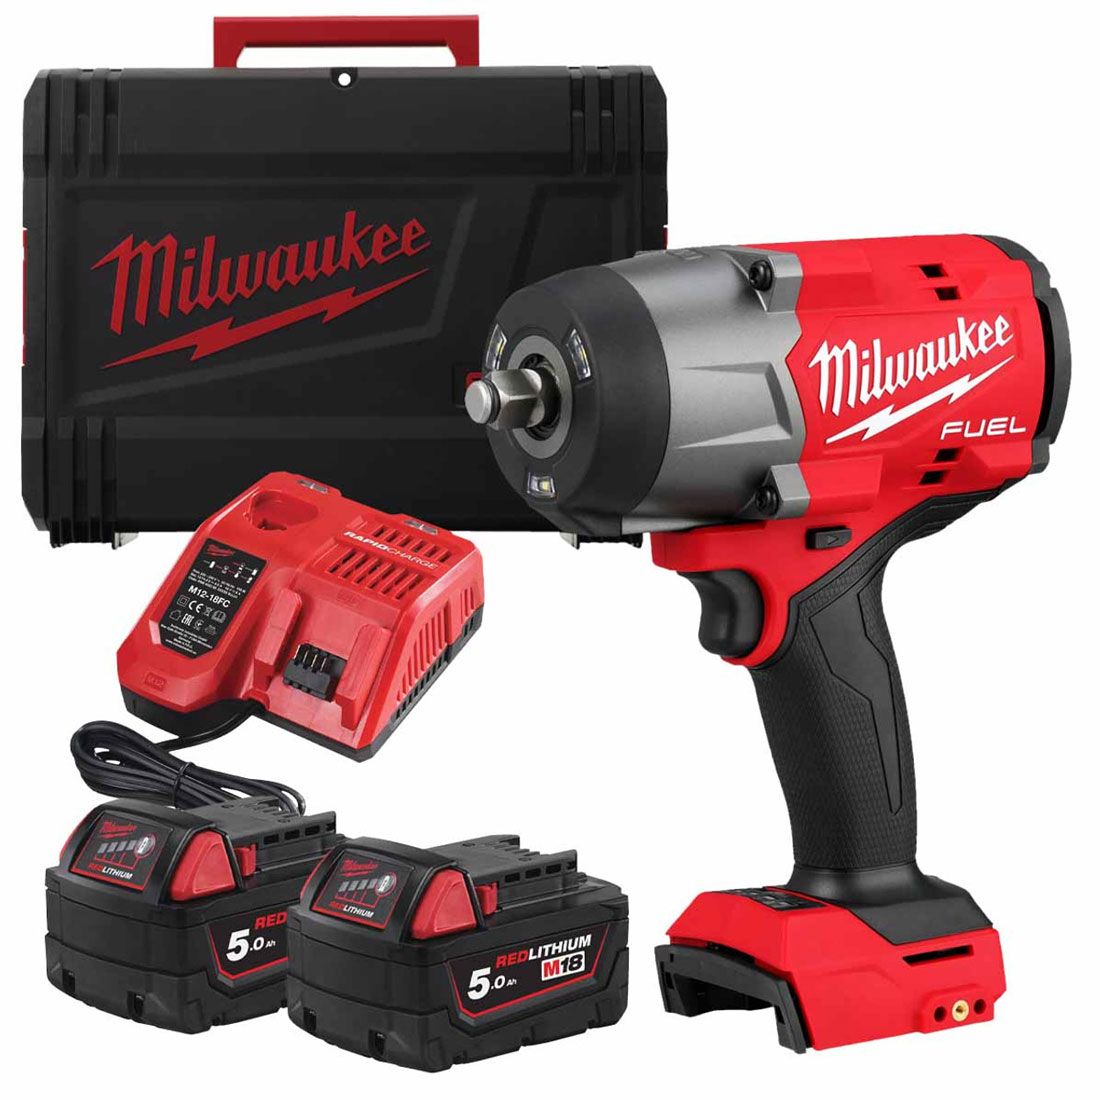 Milwaukee 18V Fuel High Torque 1/2 Impact Wrench - M18FHIW2F12 - 5.0ah Pack